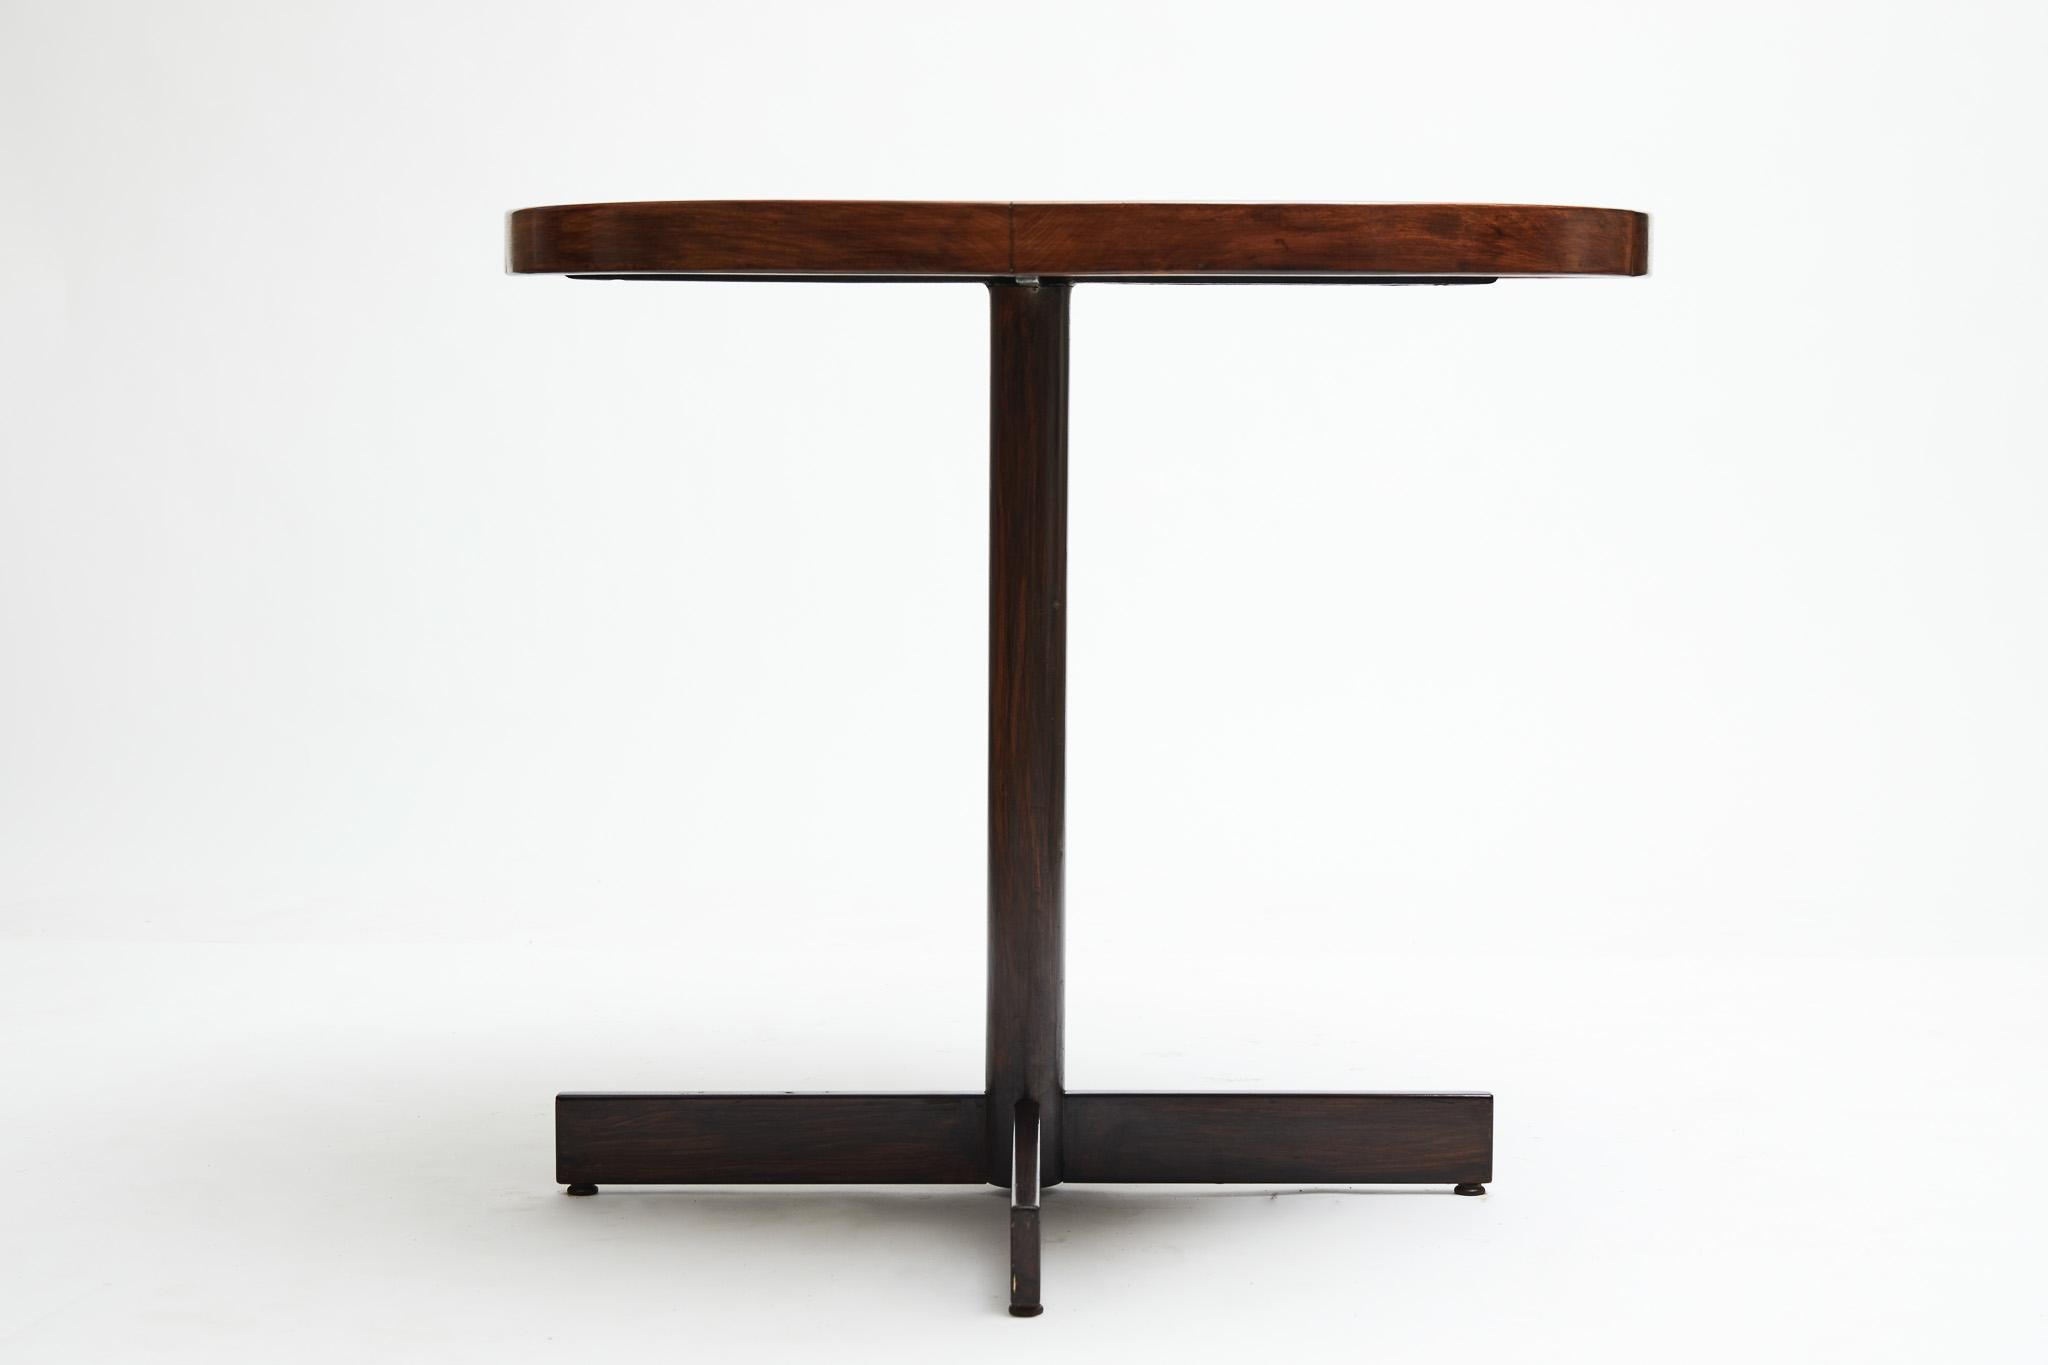 Hand-Painted Brazilian Modern Cocktail Table in Hardwood & White Top by Jorge Zalszupin, 1970 For Sale